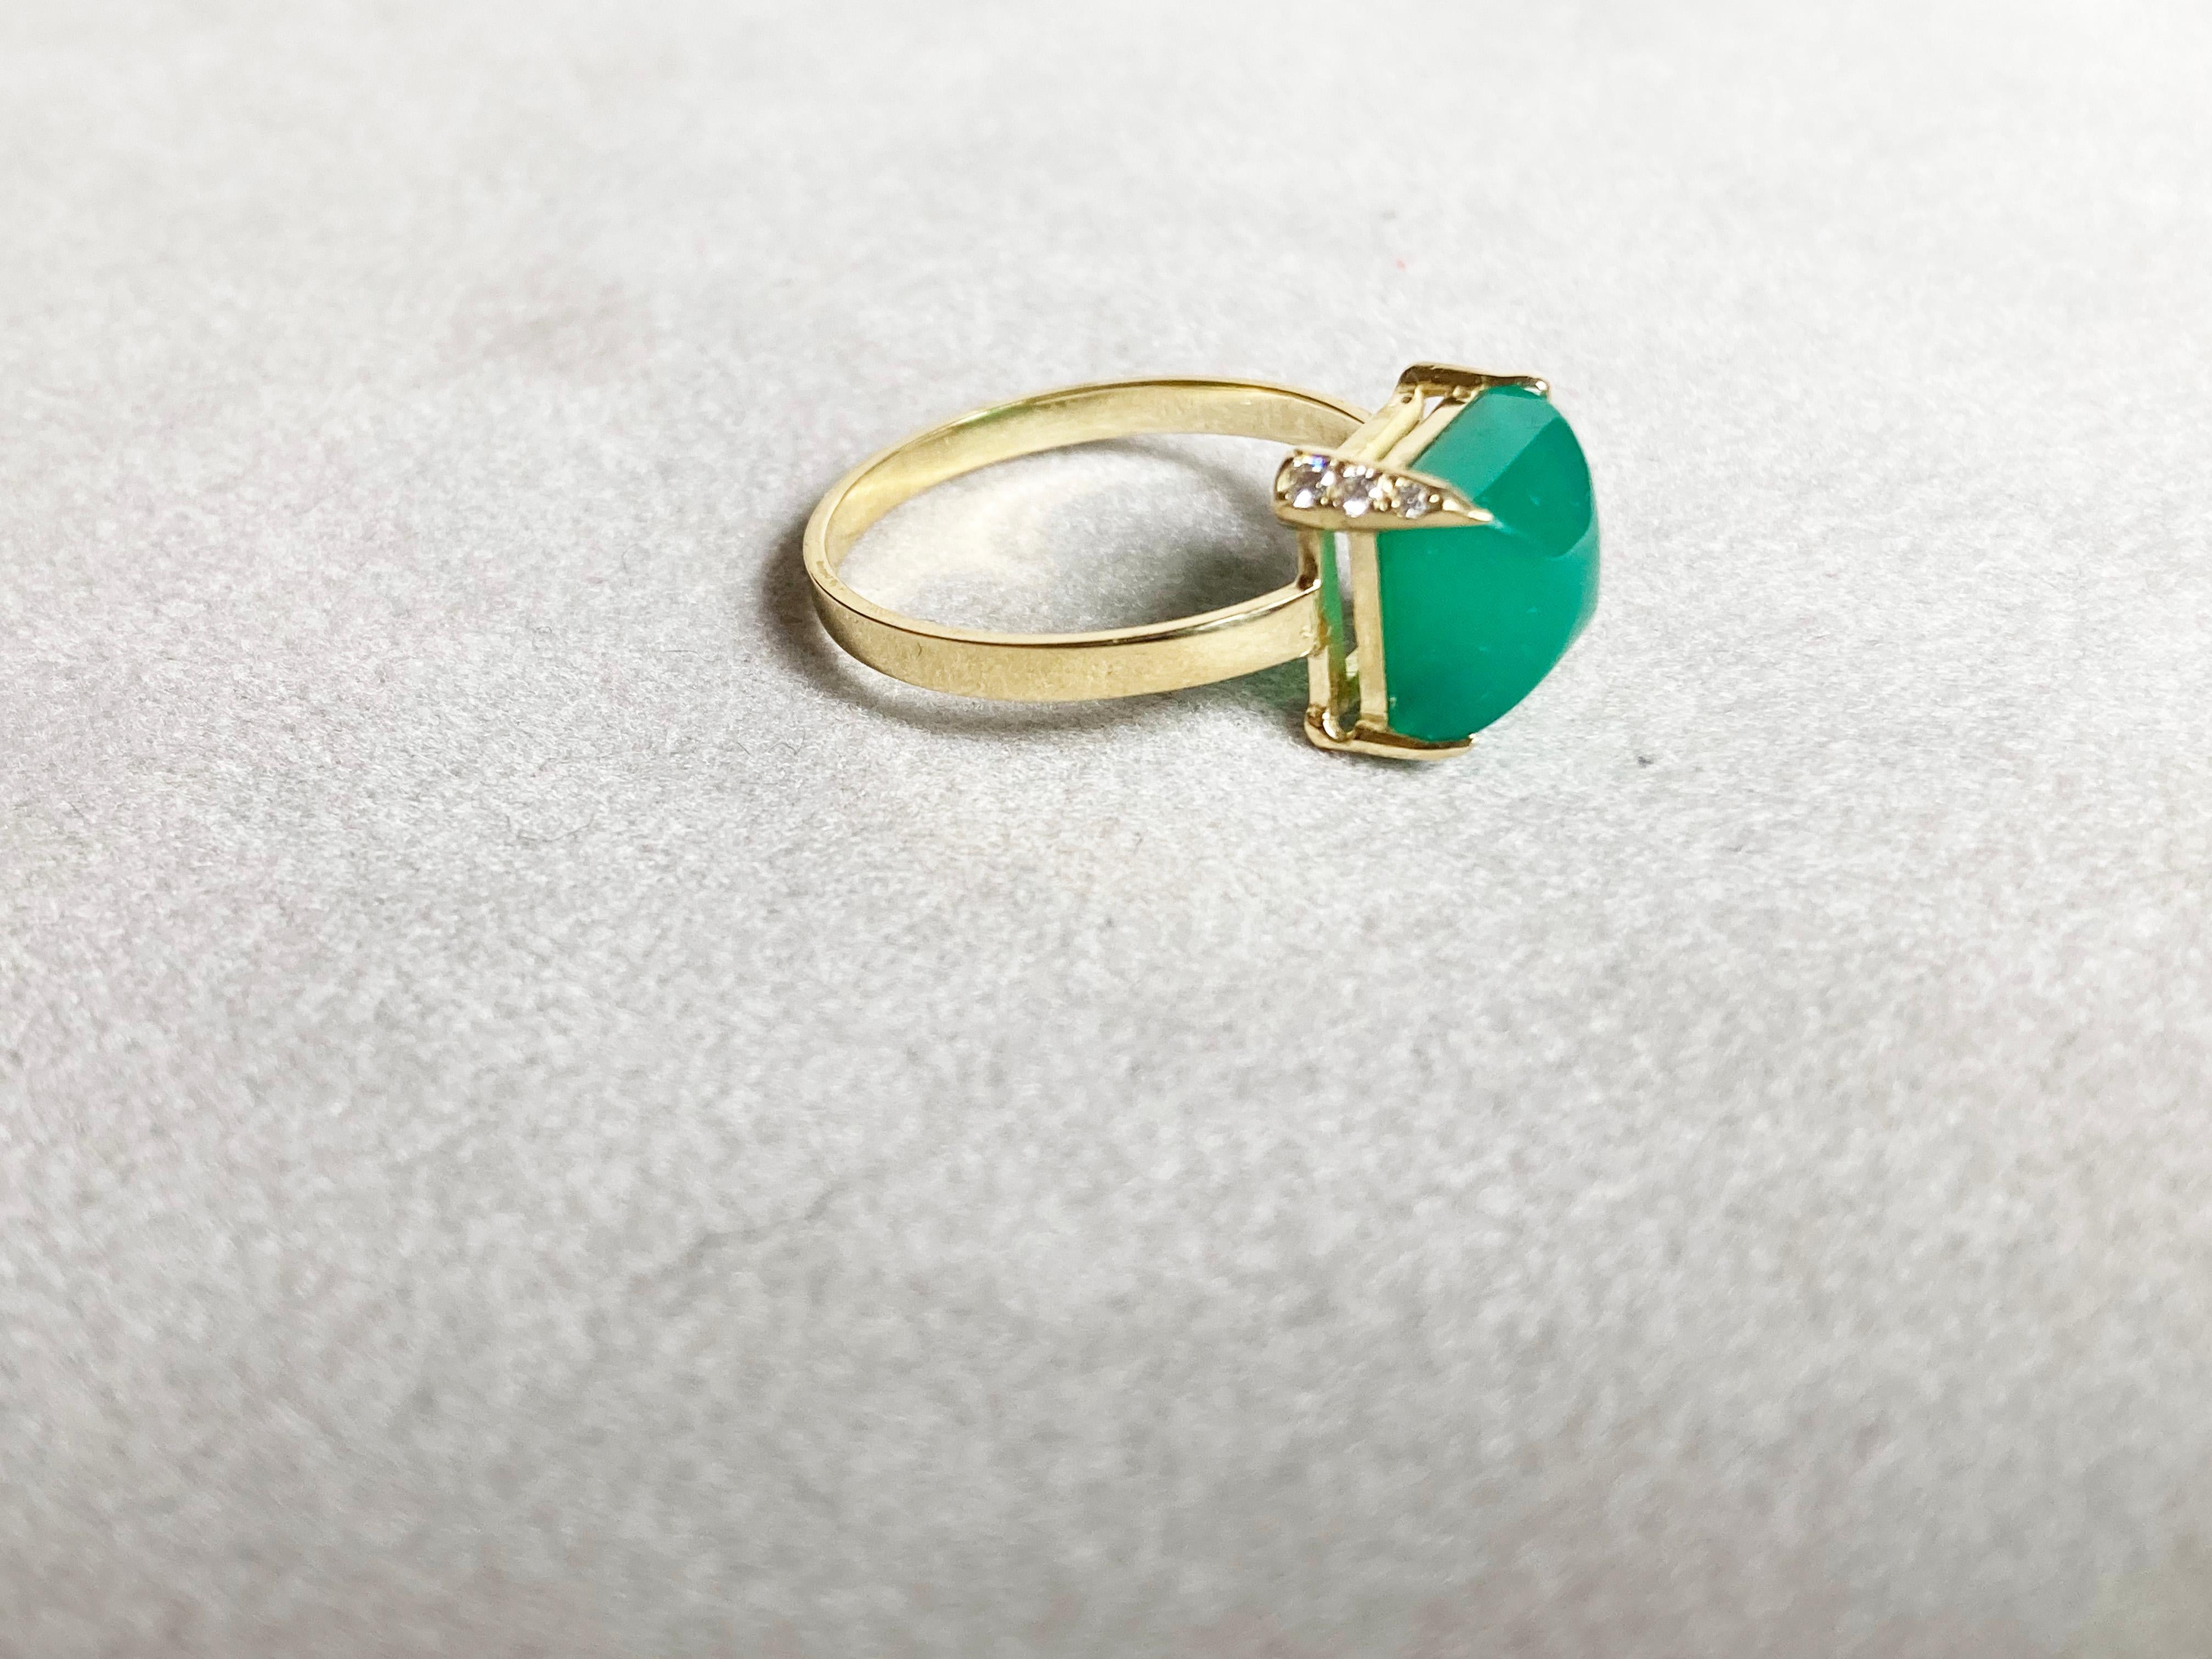 Rossella Ugolini 18K Gold Diamonds Sugarloaf Cabochon Green Agate Ring In New Condition For Sale In Rome, IT